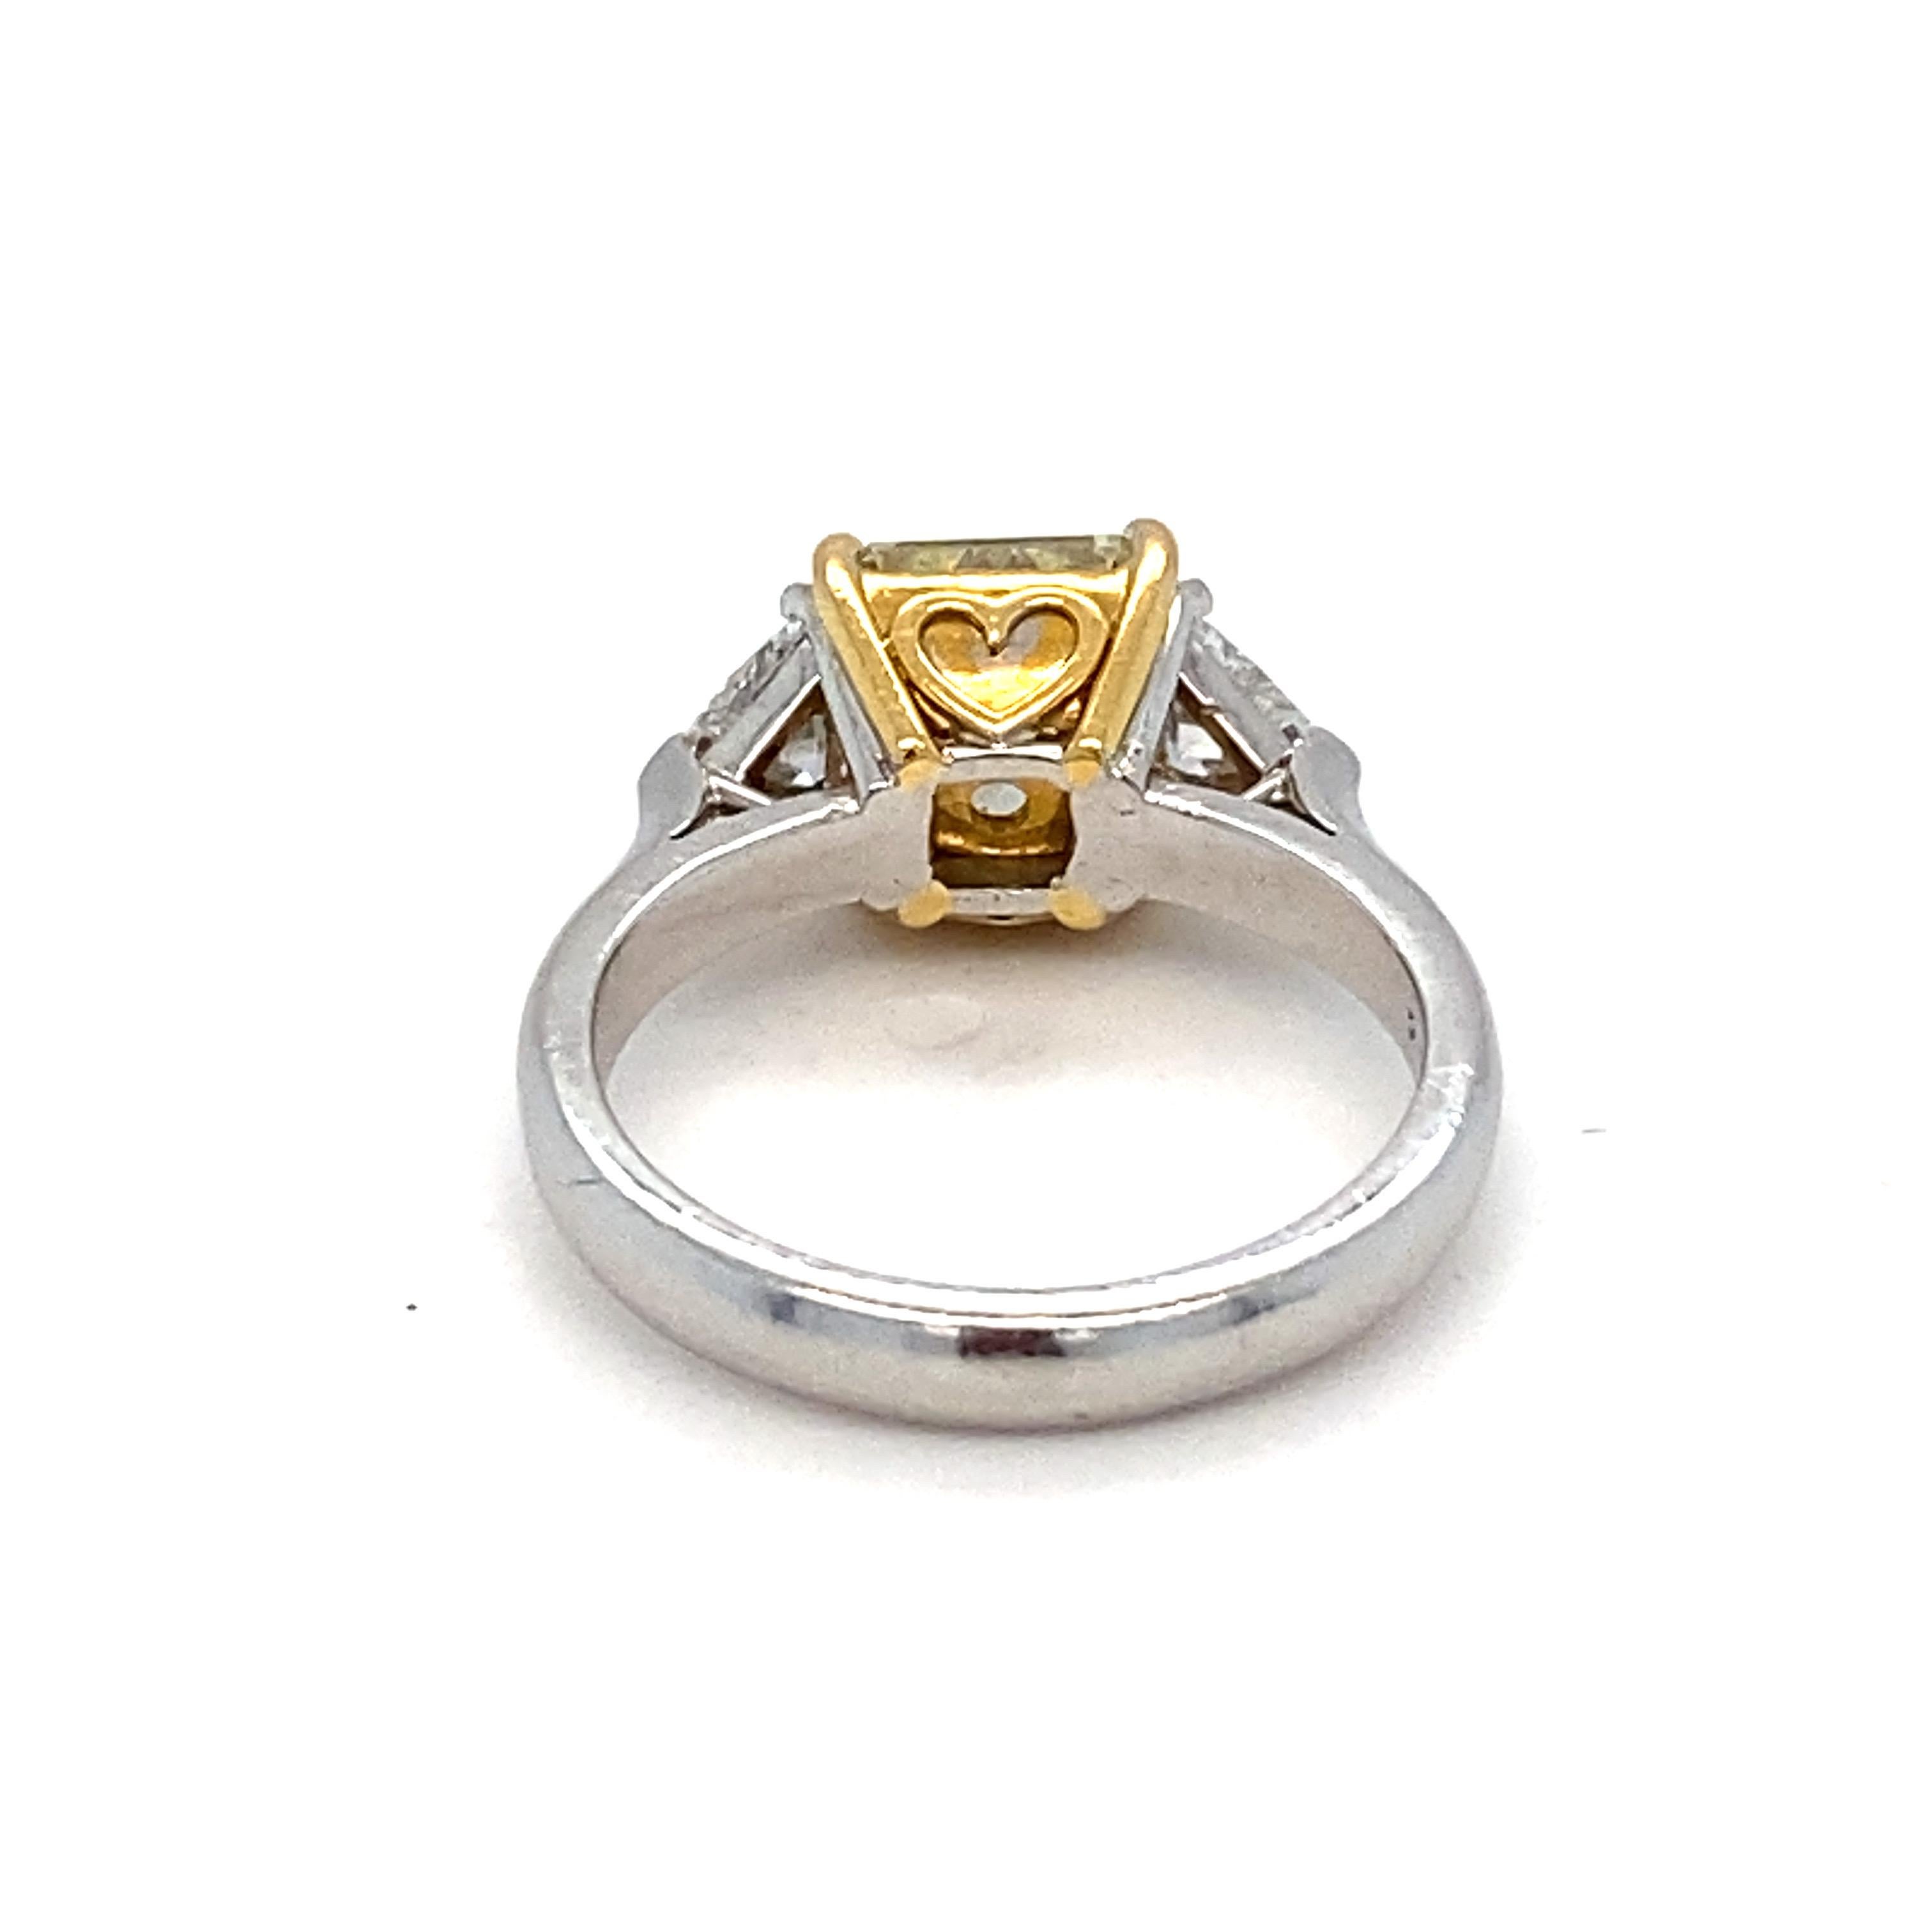 Gia Certified 1.83 Carat Natural Fancy Light Yellow Cushion Diamond is showcased in the center with two trillion white diamonds on the sides. Center stone is mounted in 22K yellow gold and the ring is in platinum. This ring is a timeless elegant